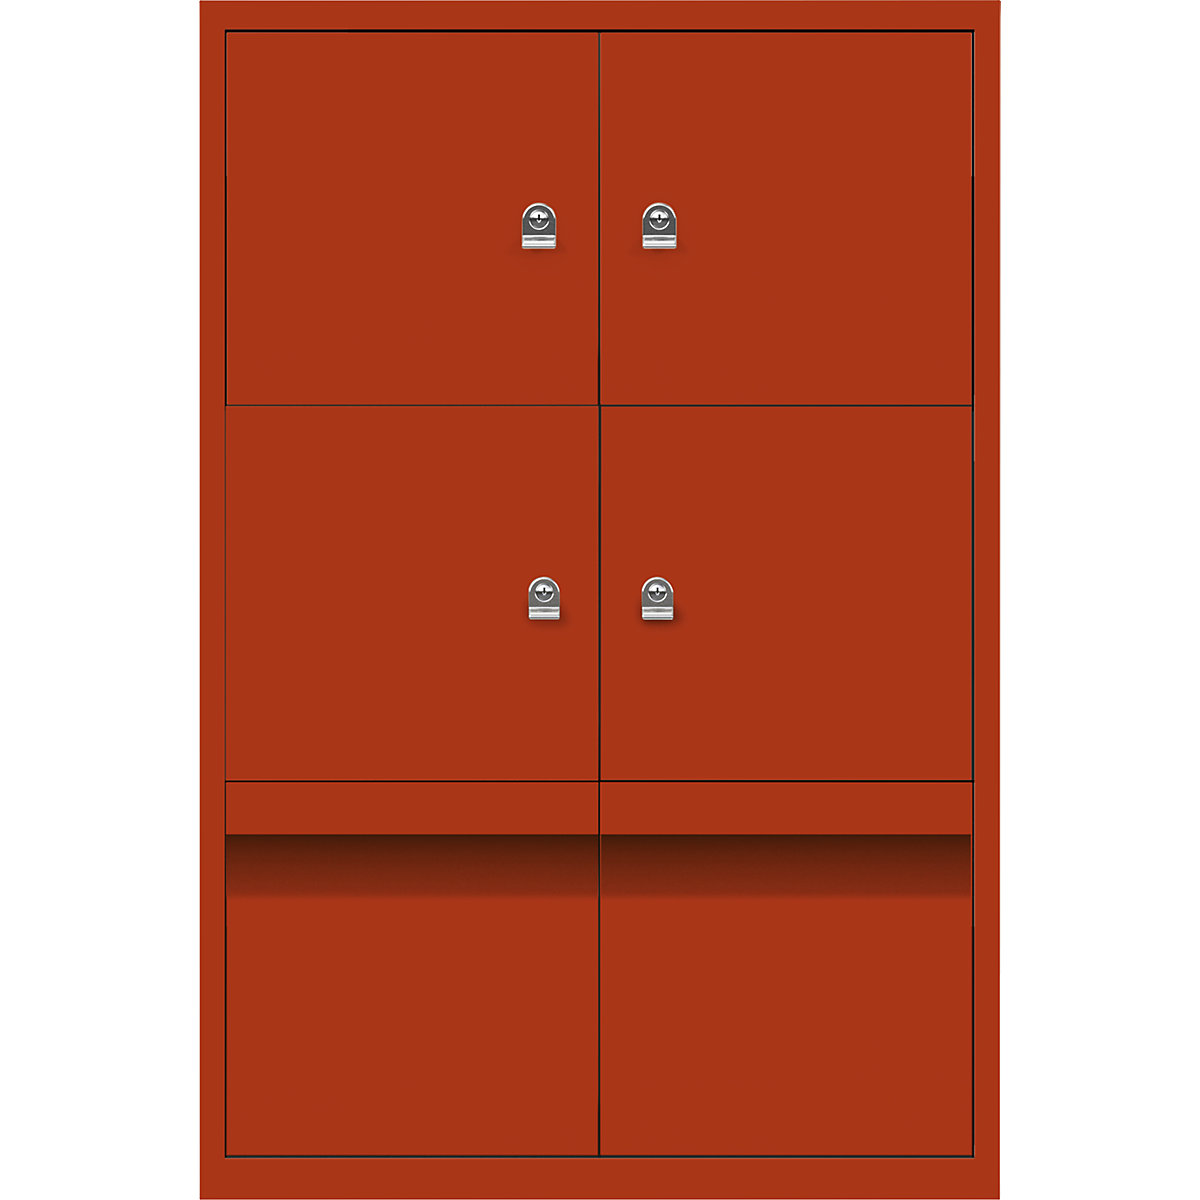 LateralFile™ lodge – BISLEY, with 4 lockable compartments and 2 drawers, height 375 mm each, sevilla-26